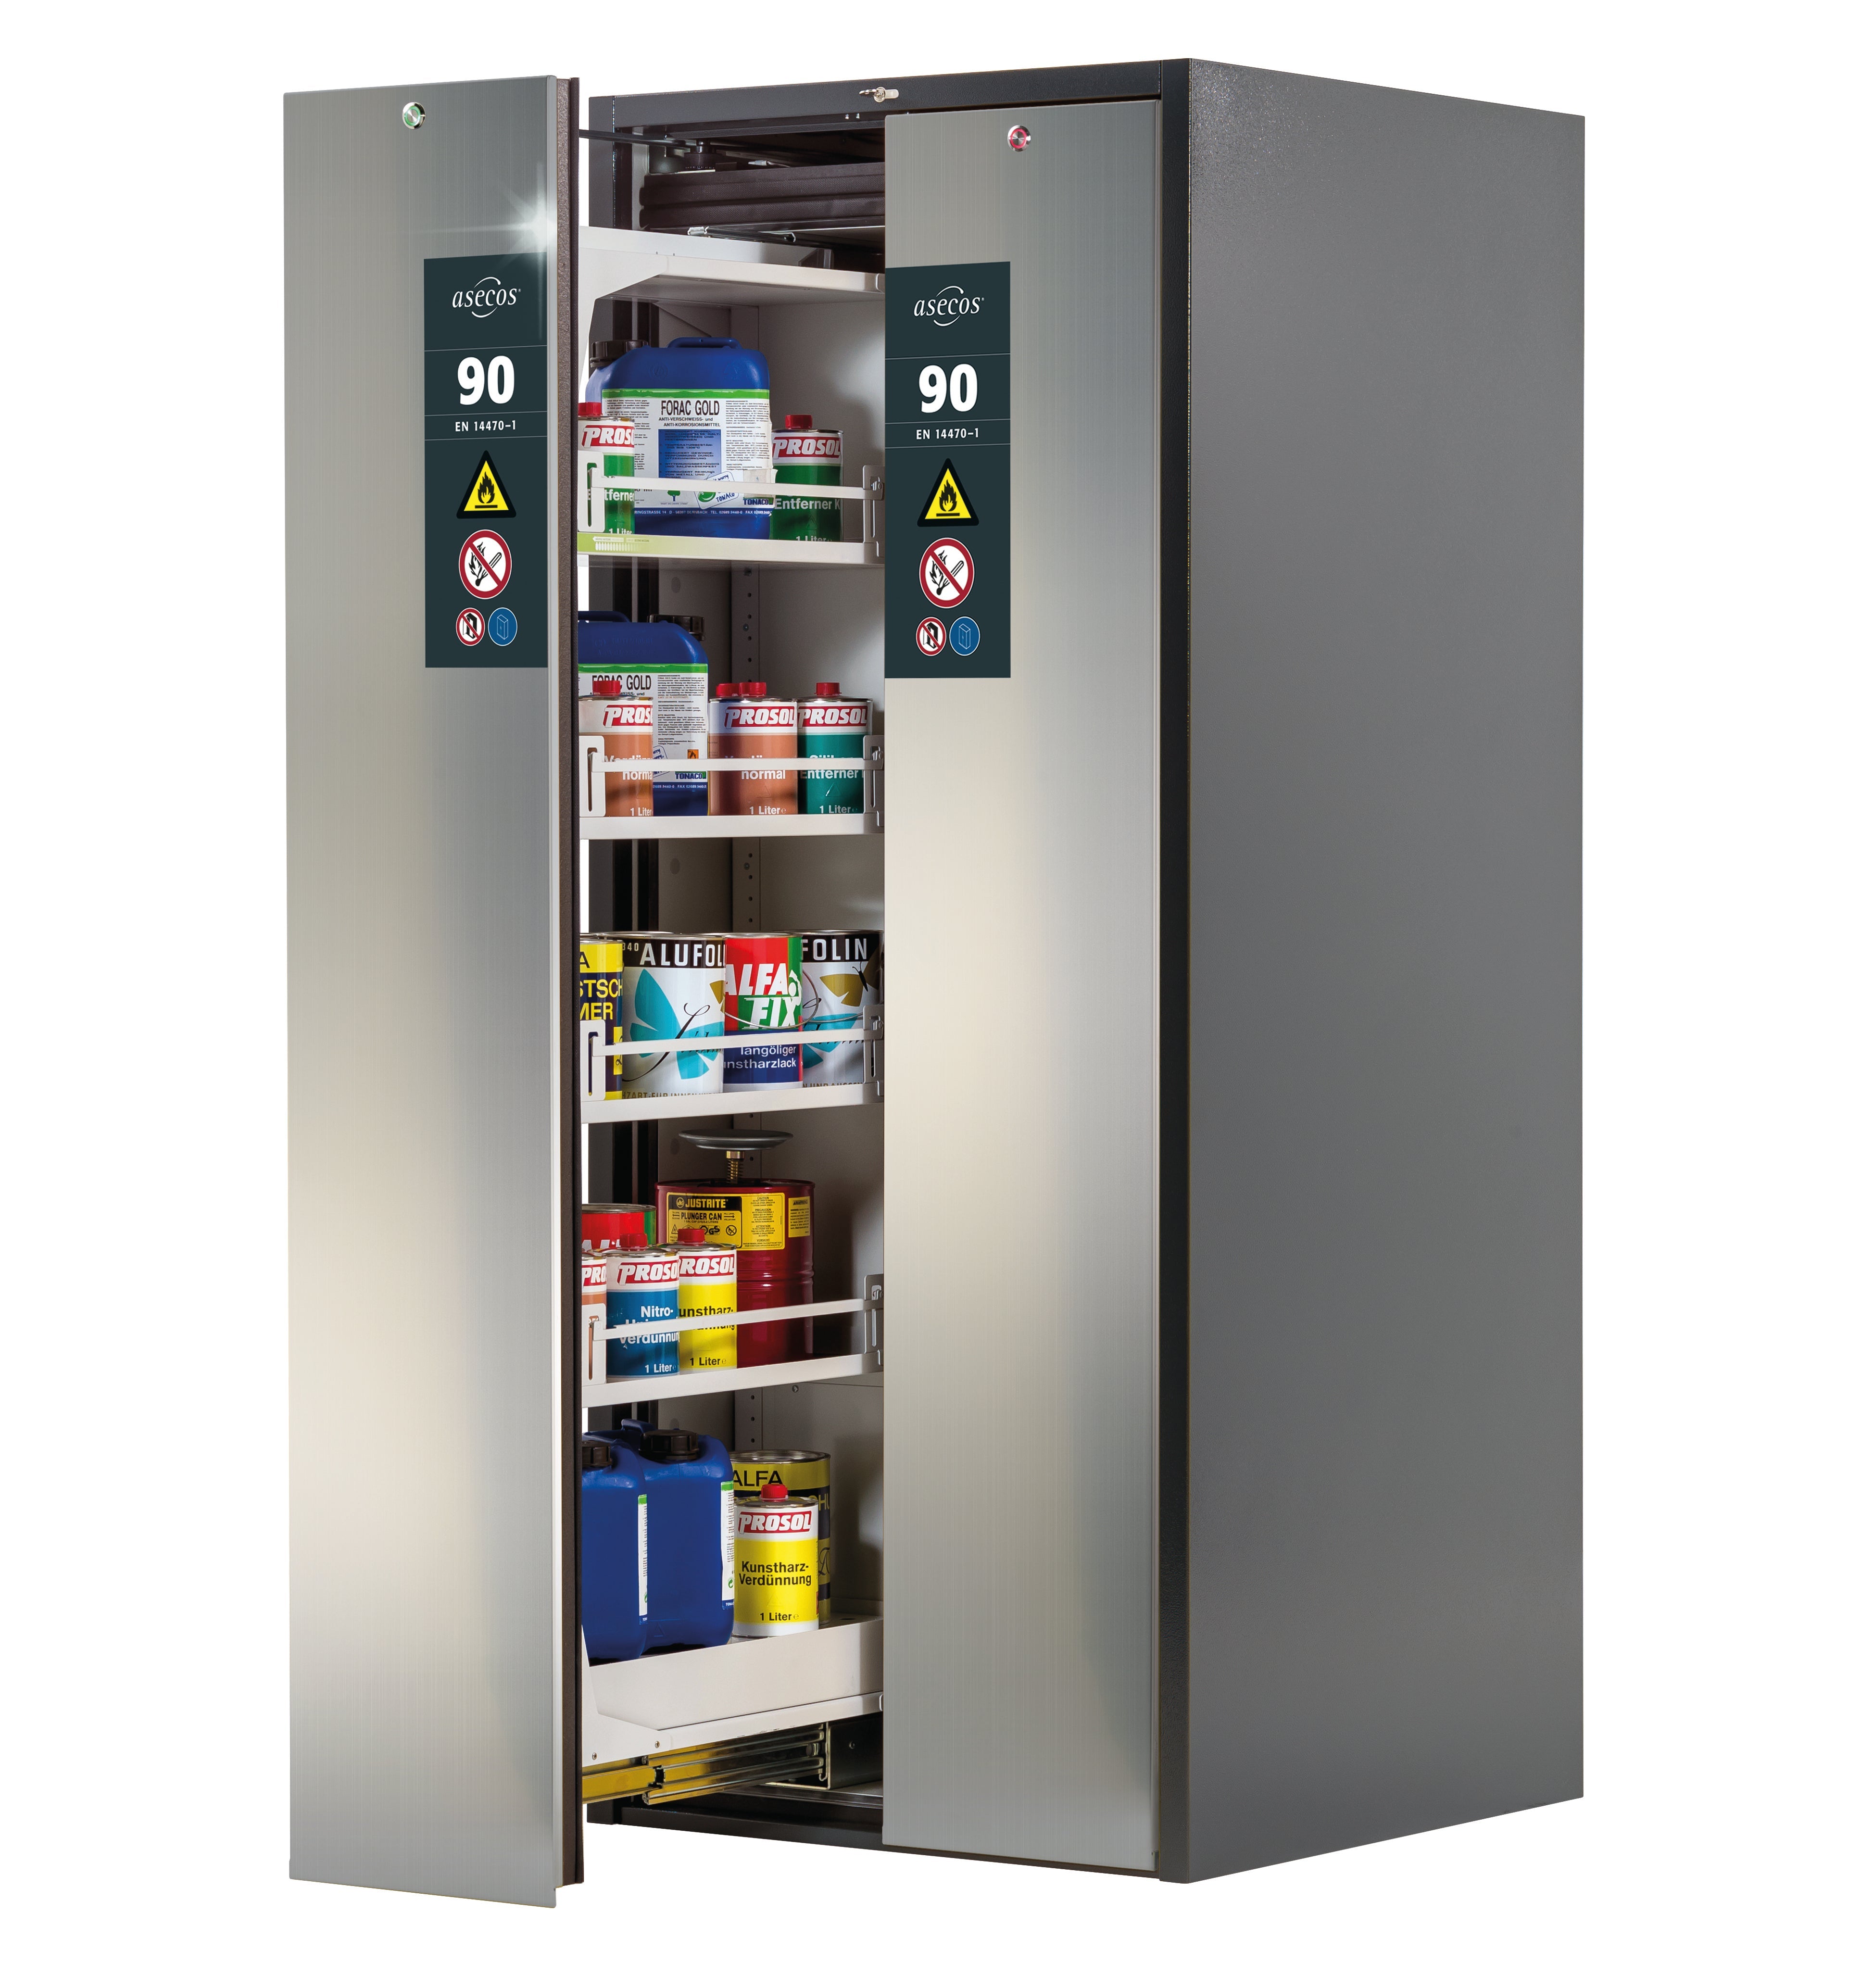 Type 90 safety cabinet V-MOVE-90 model V90.196.081.VDAC:0013 in stainless steel with 4x standard shelves (sheet steel)